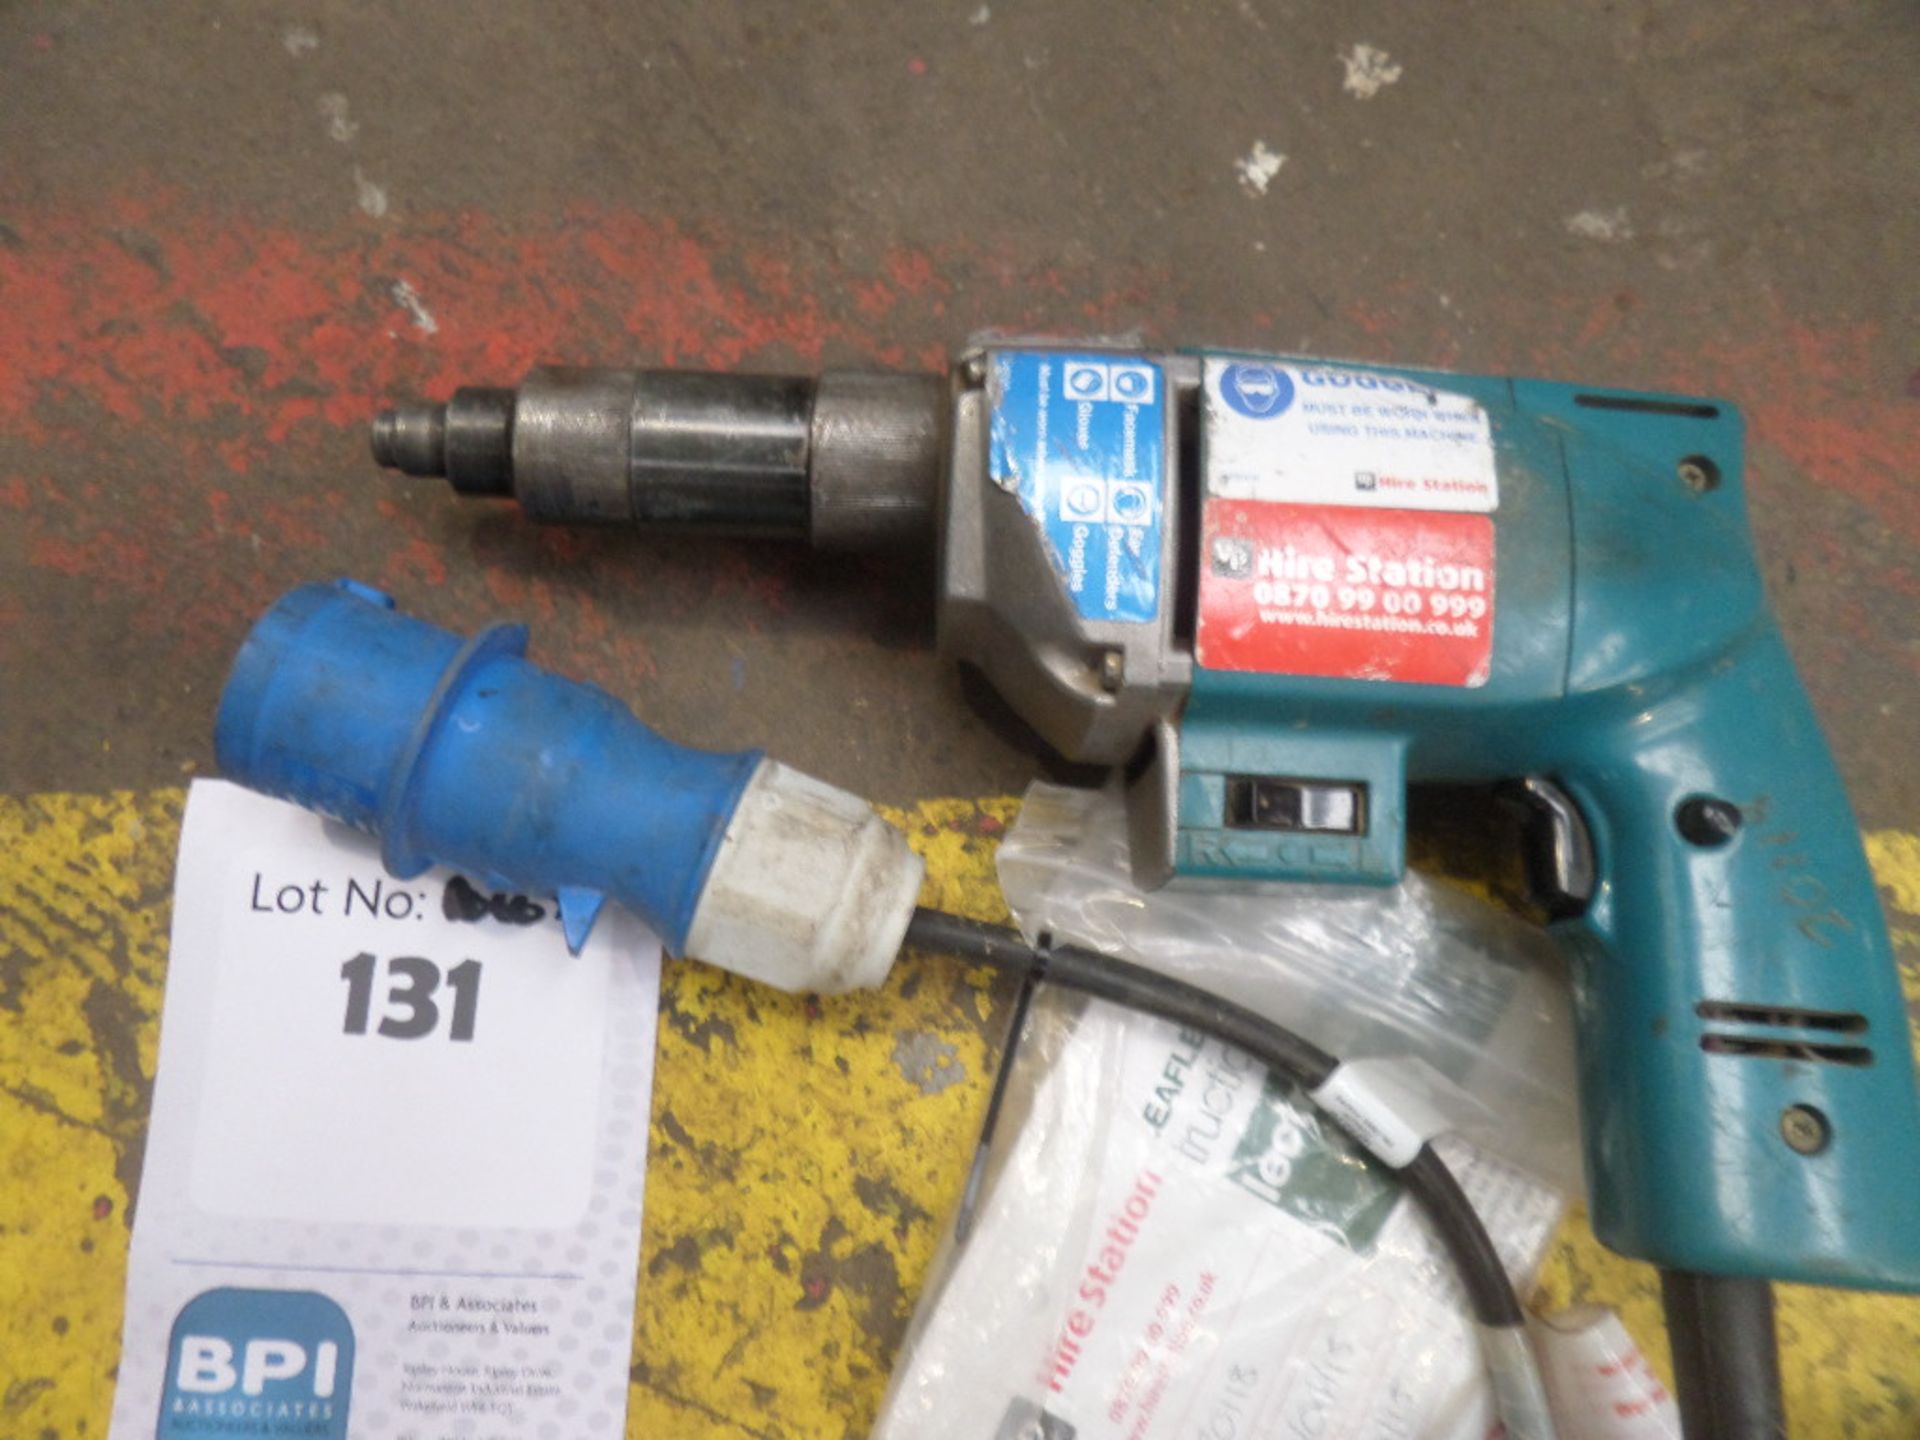 MAKITA 6701B {032016} ELECTRIC SCREWDRIVER 240v 16amp connection - power there and appears to work f